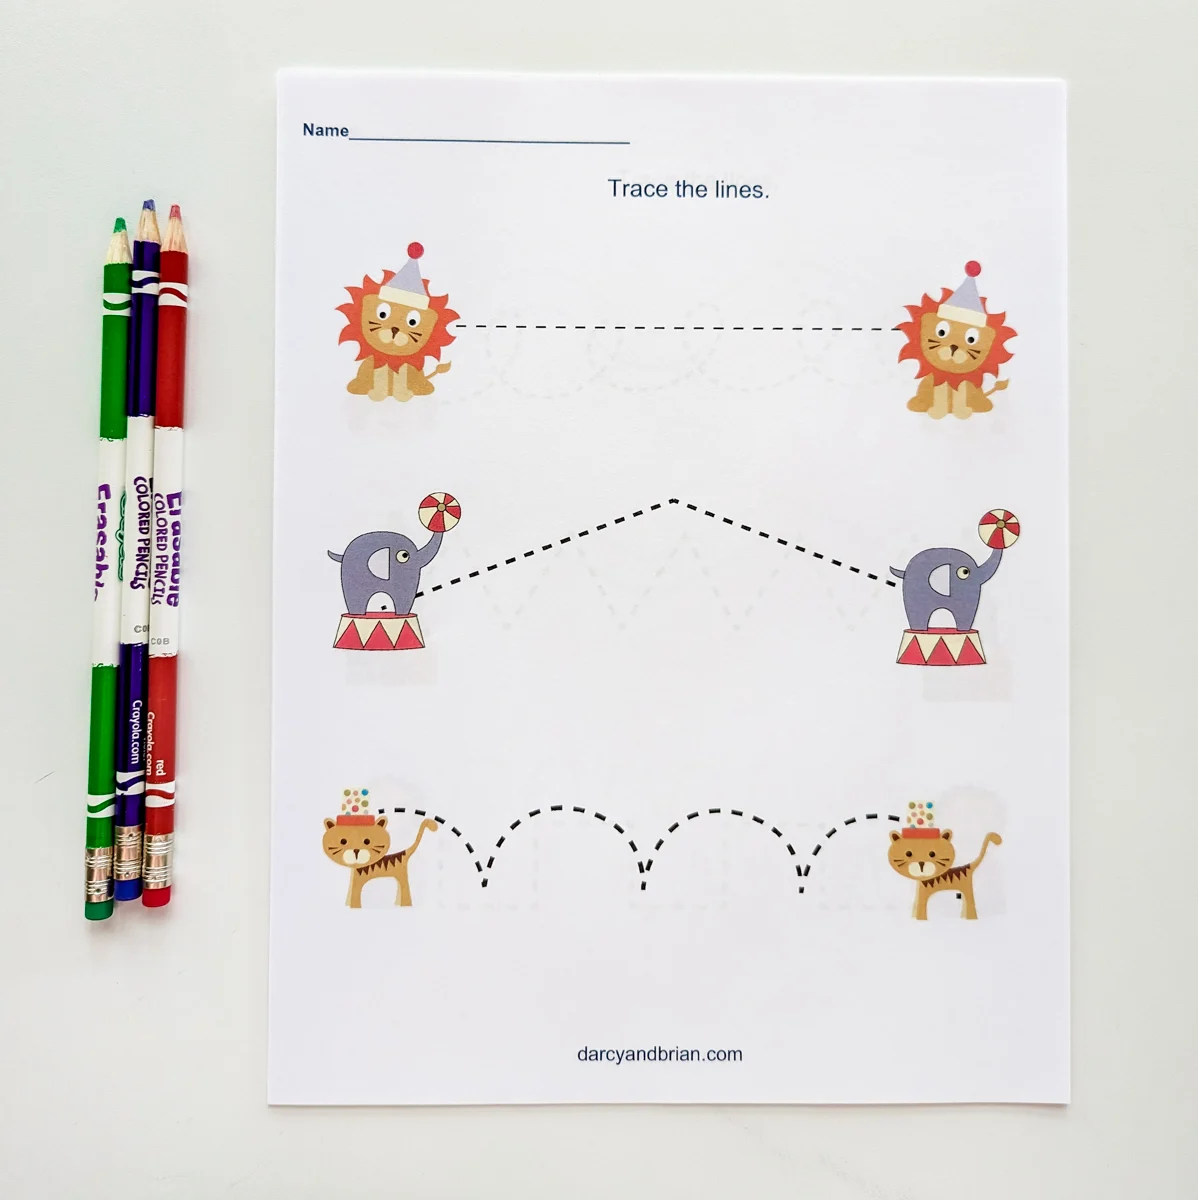 Circus line tracing printable with circus animals on it. A few colored pencils lay next to it.